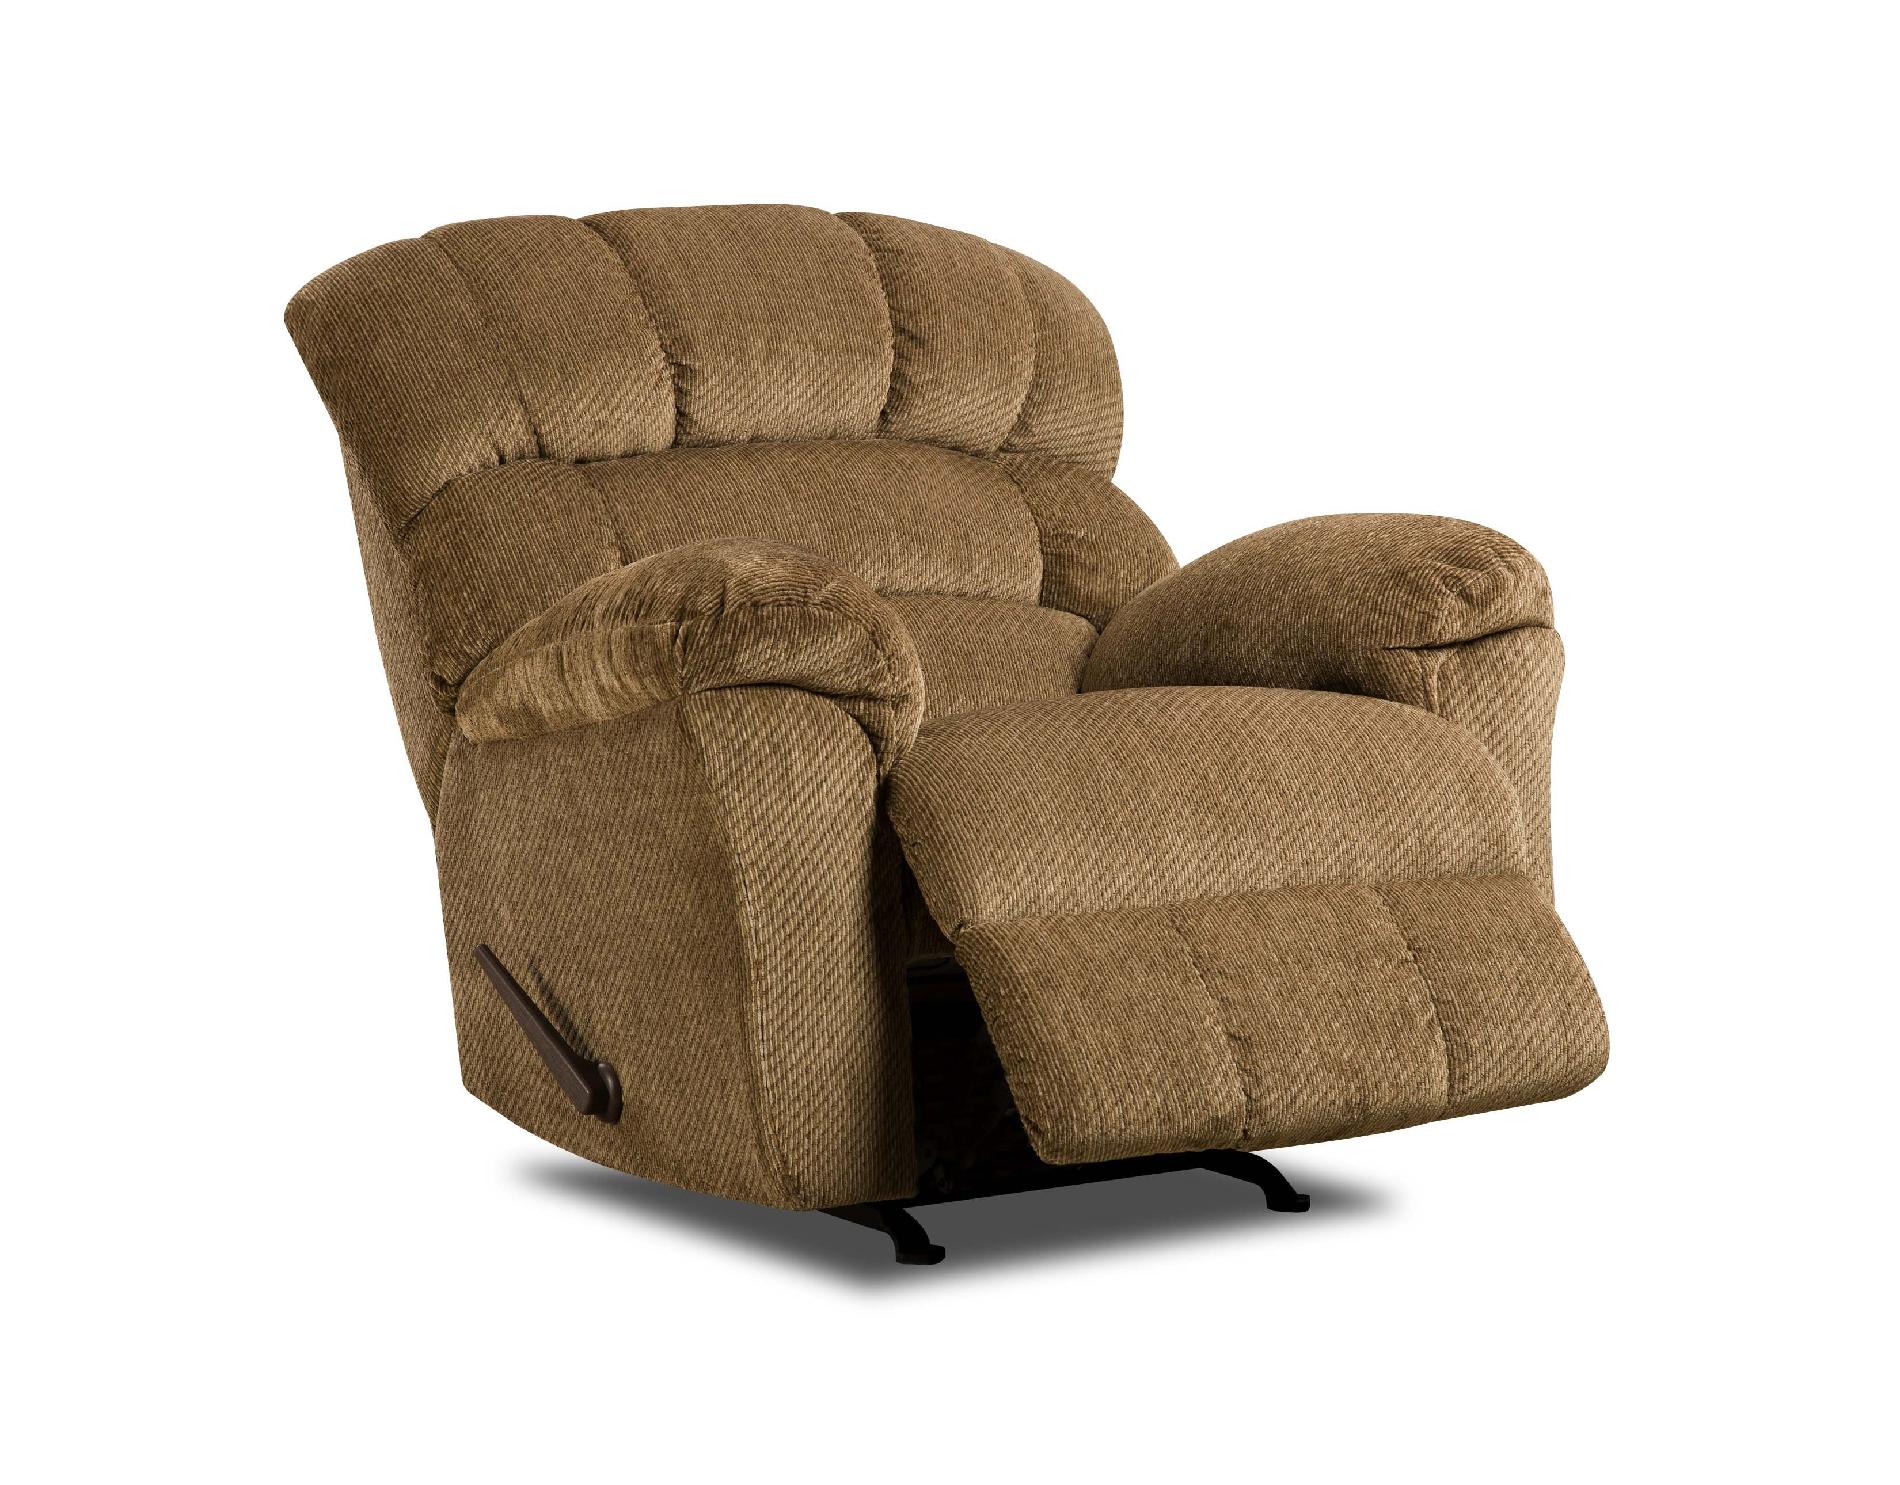 Simmons Upholstery wendall traditional rocker recliner   Shop living